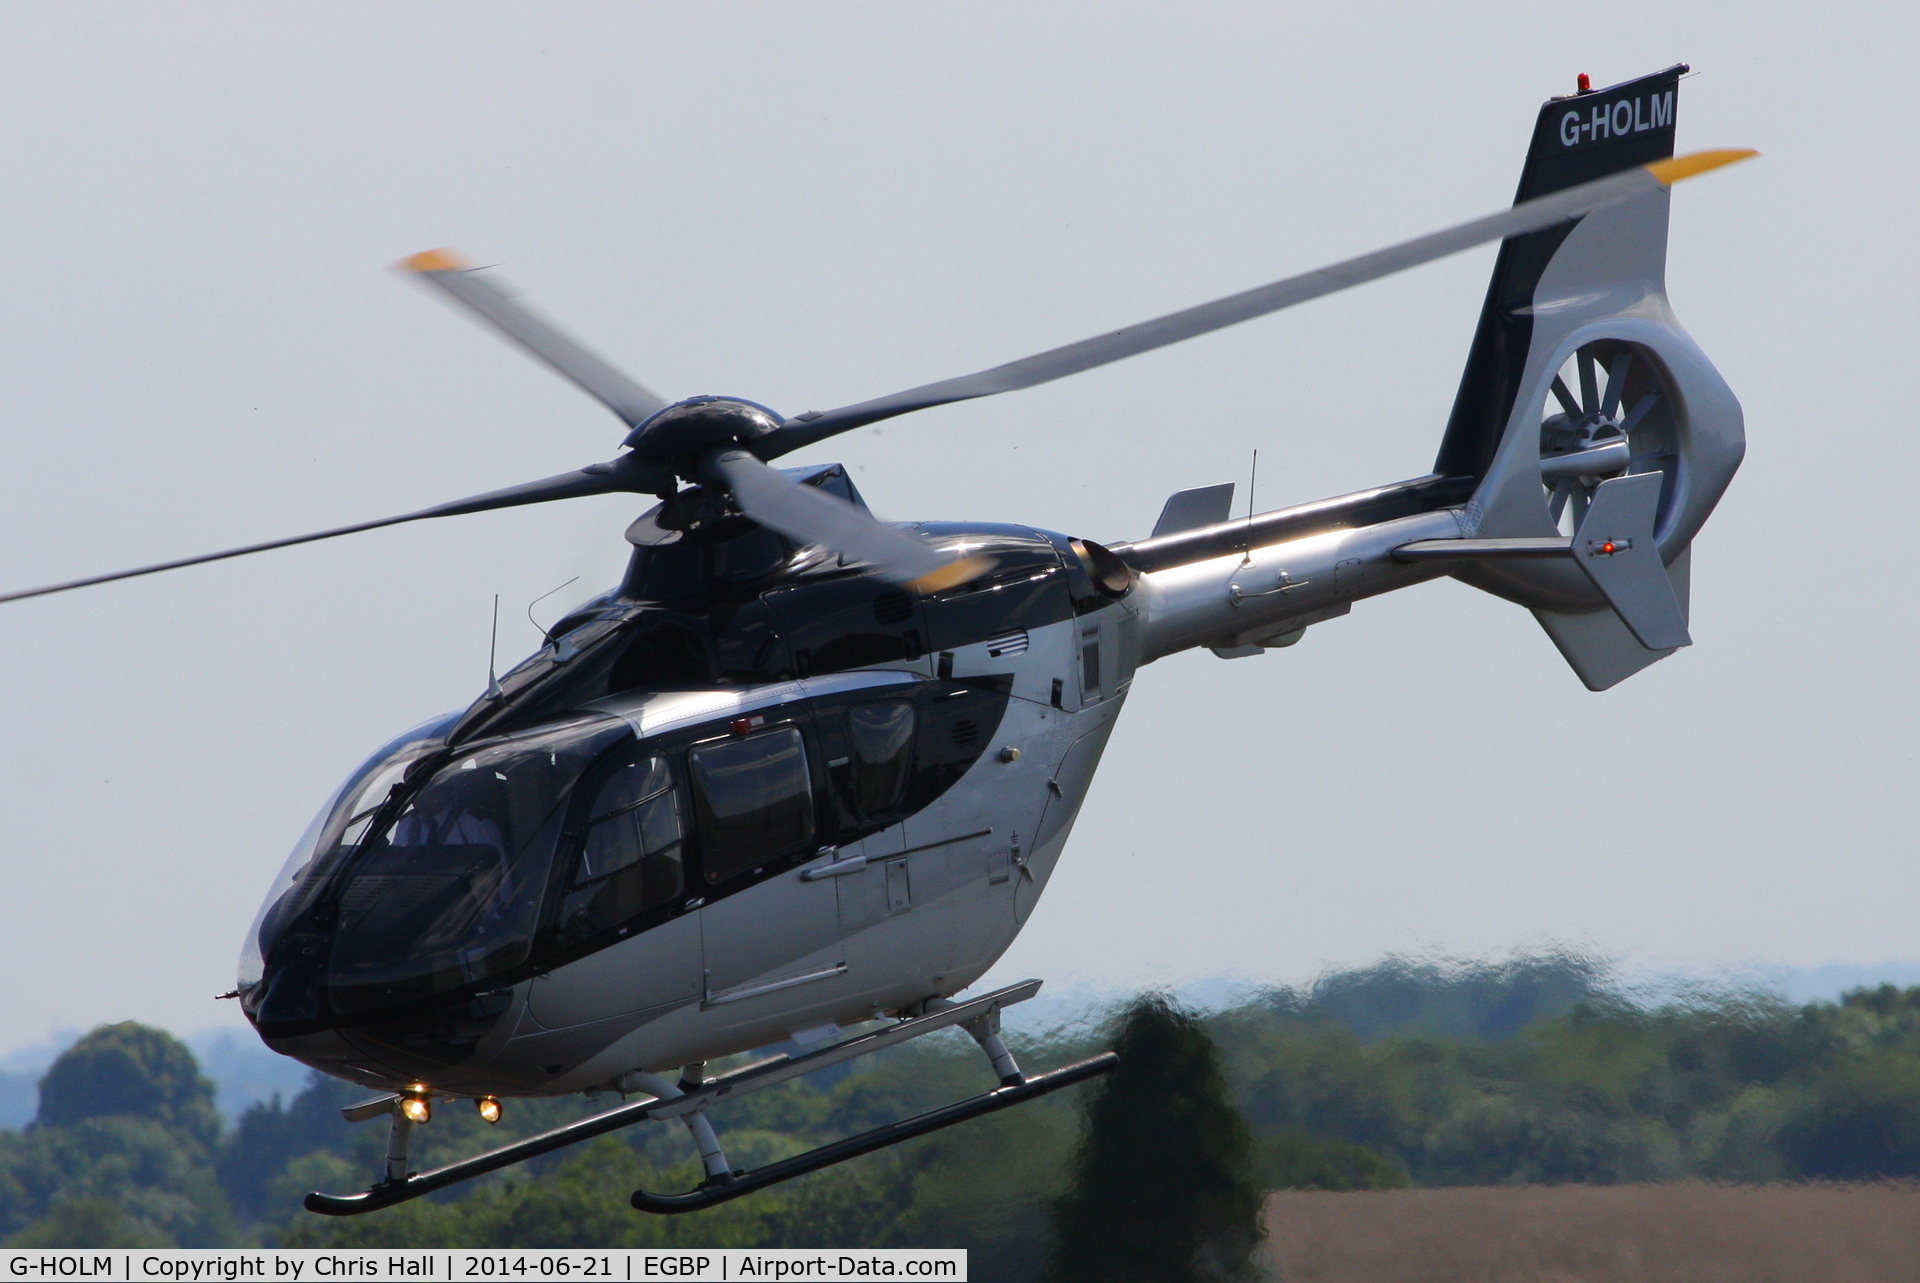 G-HOLM, 2007 Eurocopter EC-135T-2+ C/N 0574, Departing from Kemble